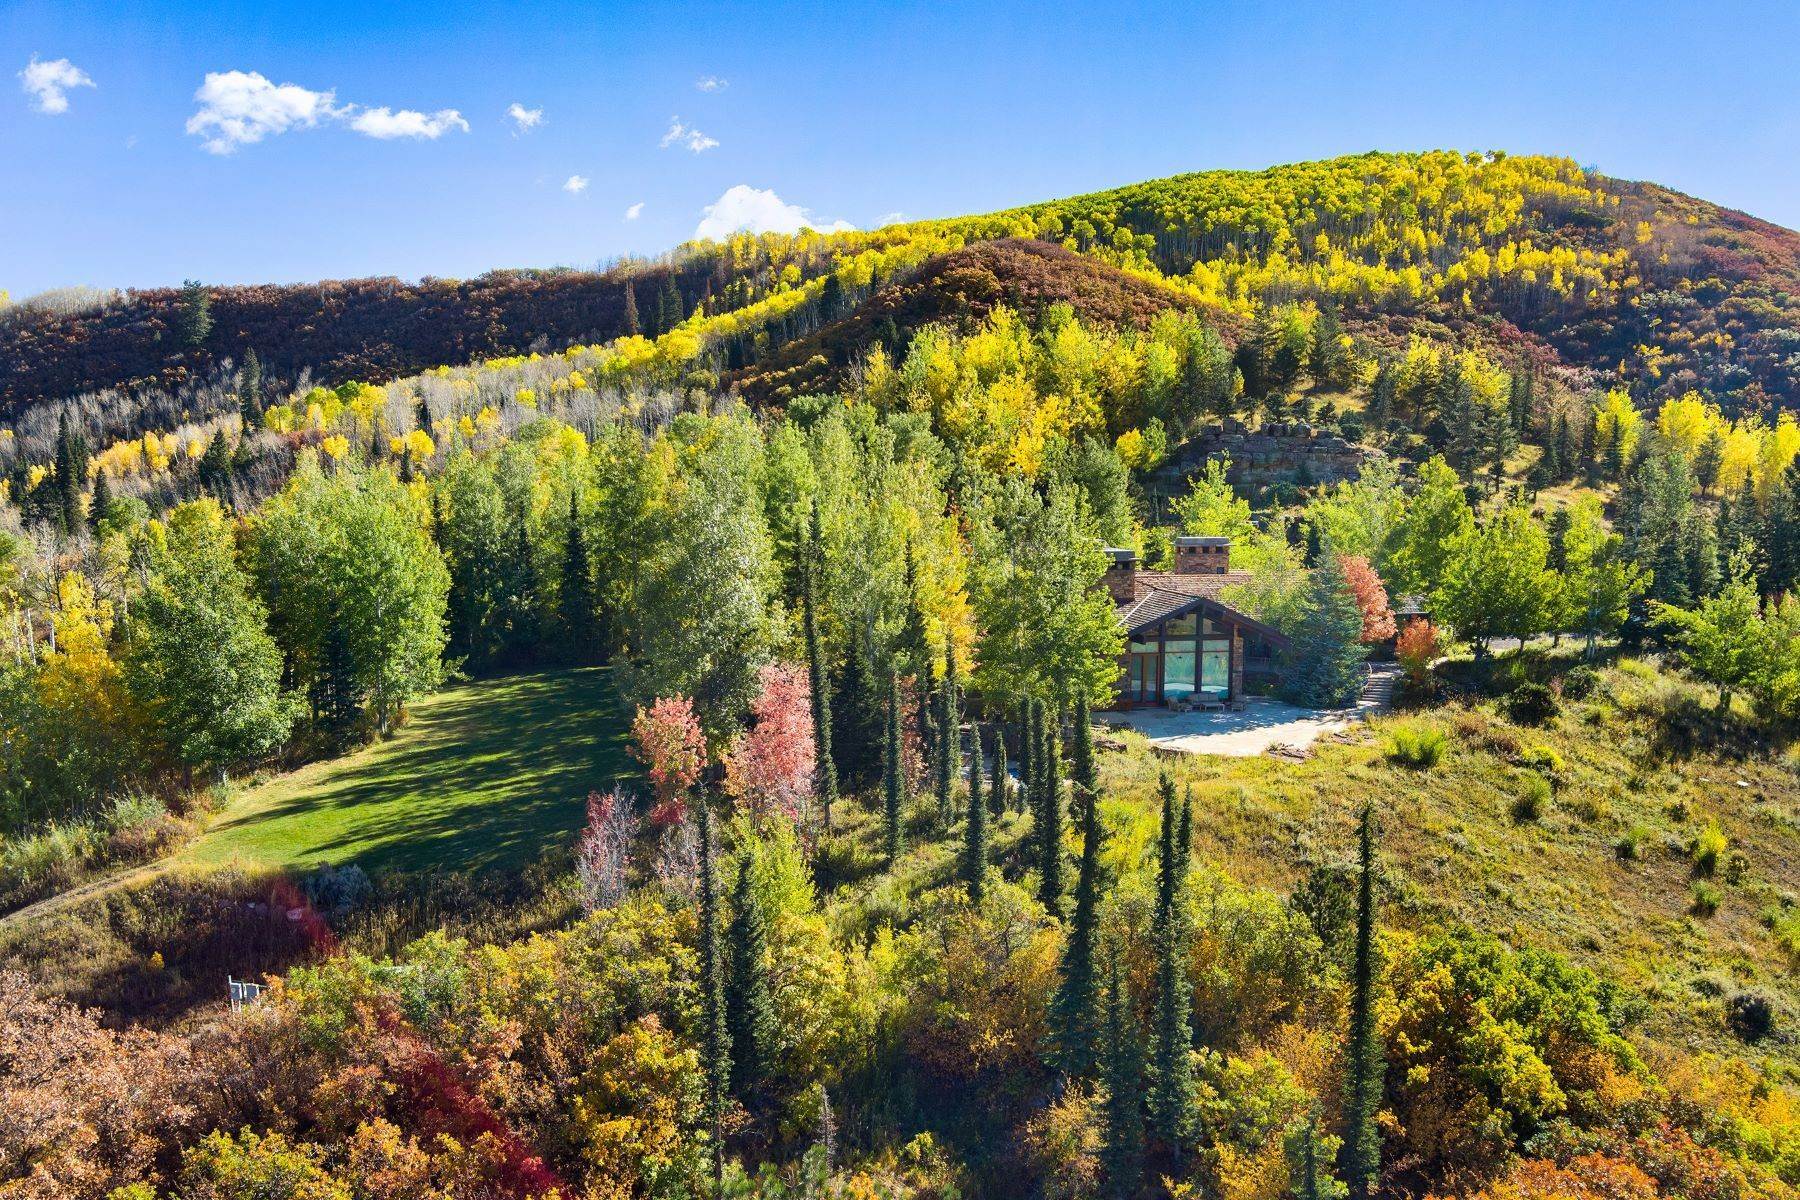 Single Family Homes for Sale at Carroll Drive Properties 1020, 300, 310, 314 Carroll Drive Aspen, Colorado 81611 United States